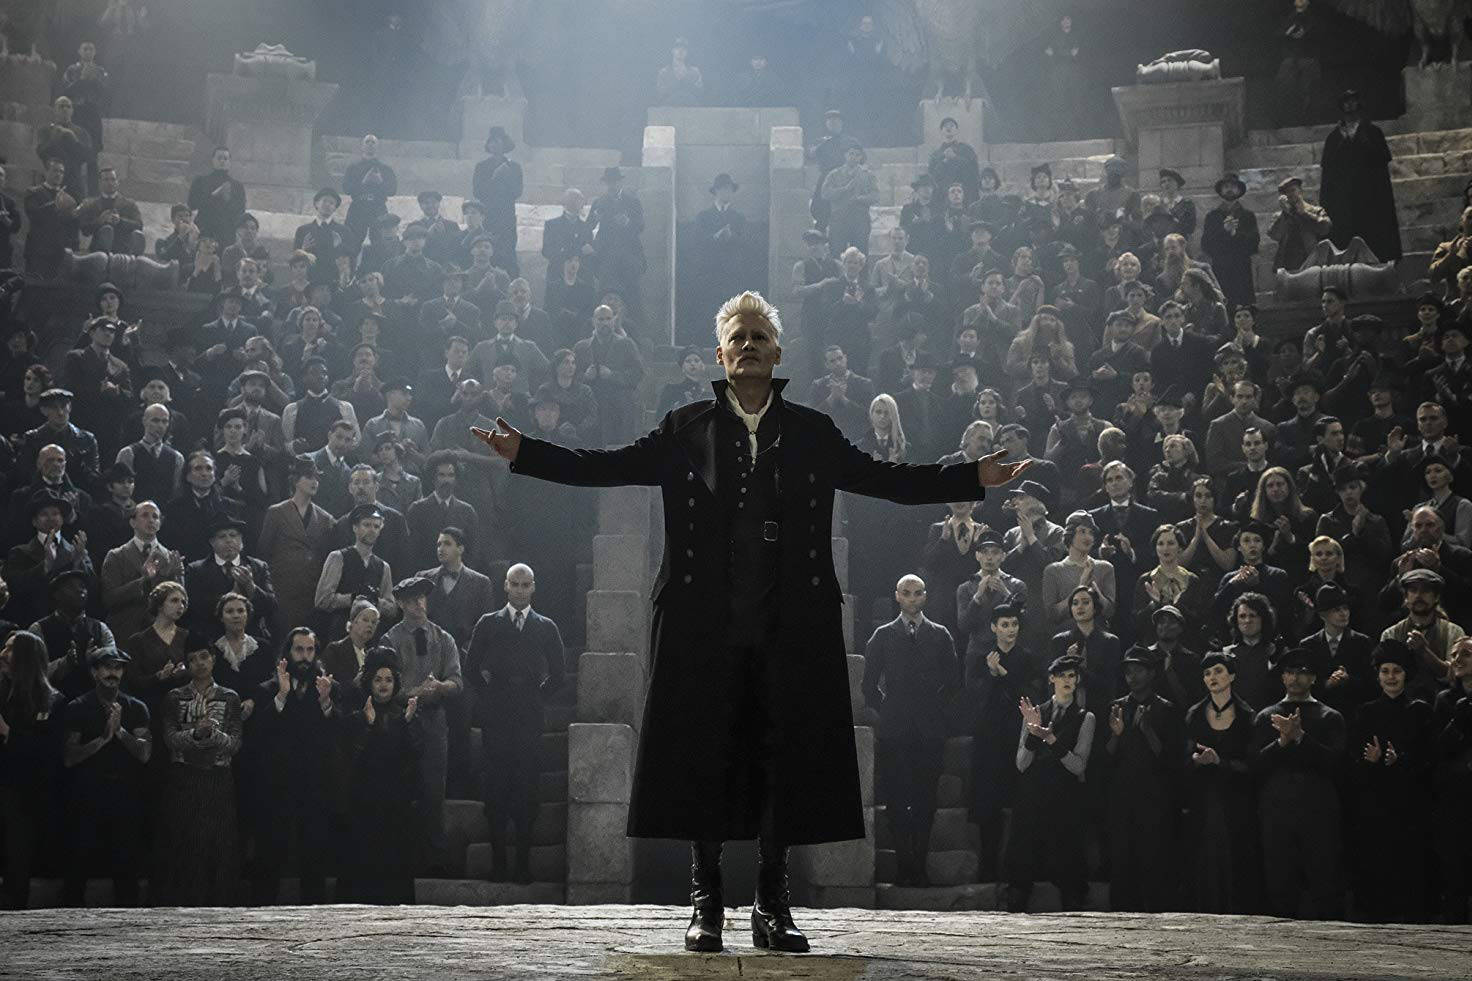 ‘Fantastic Beasts: The Crimes of Grindelwald’ fails to justify its existence